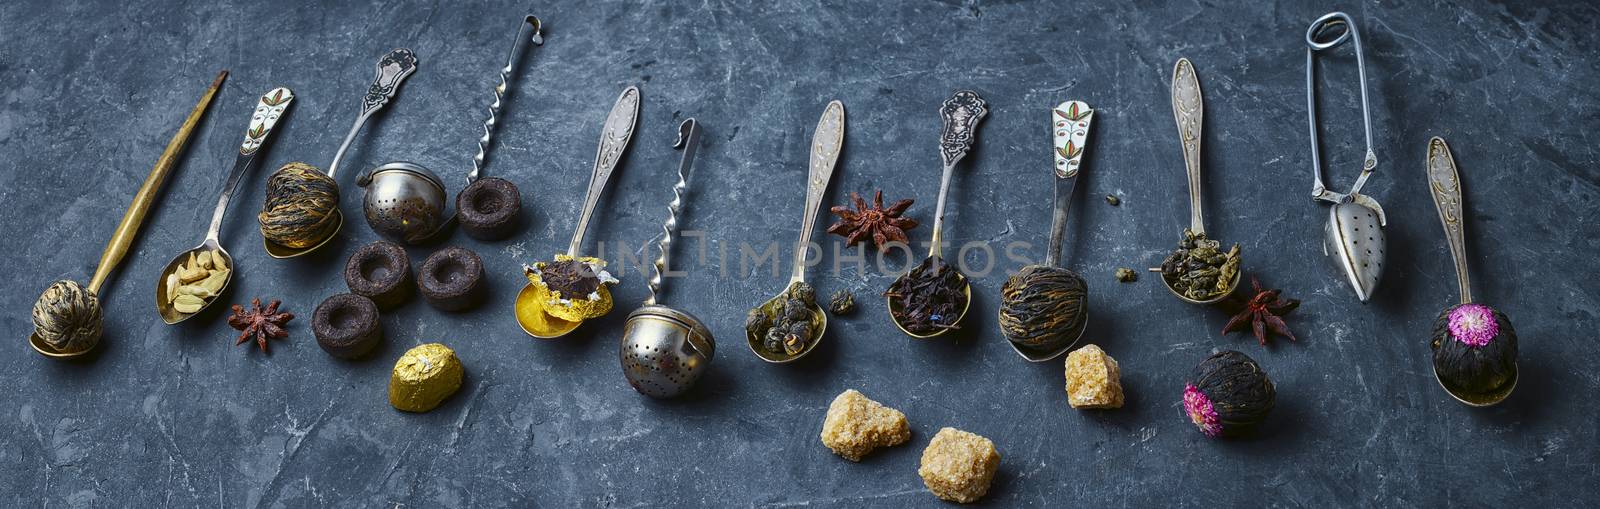 banner of tea leaves in a stylish tea boxes on slate concrete background